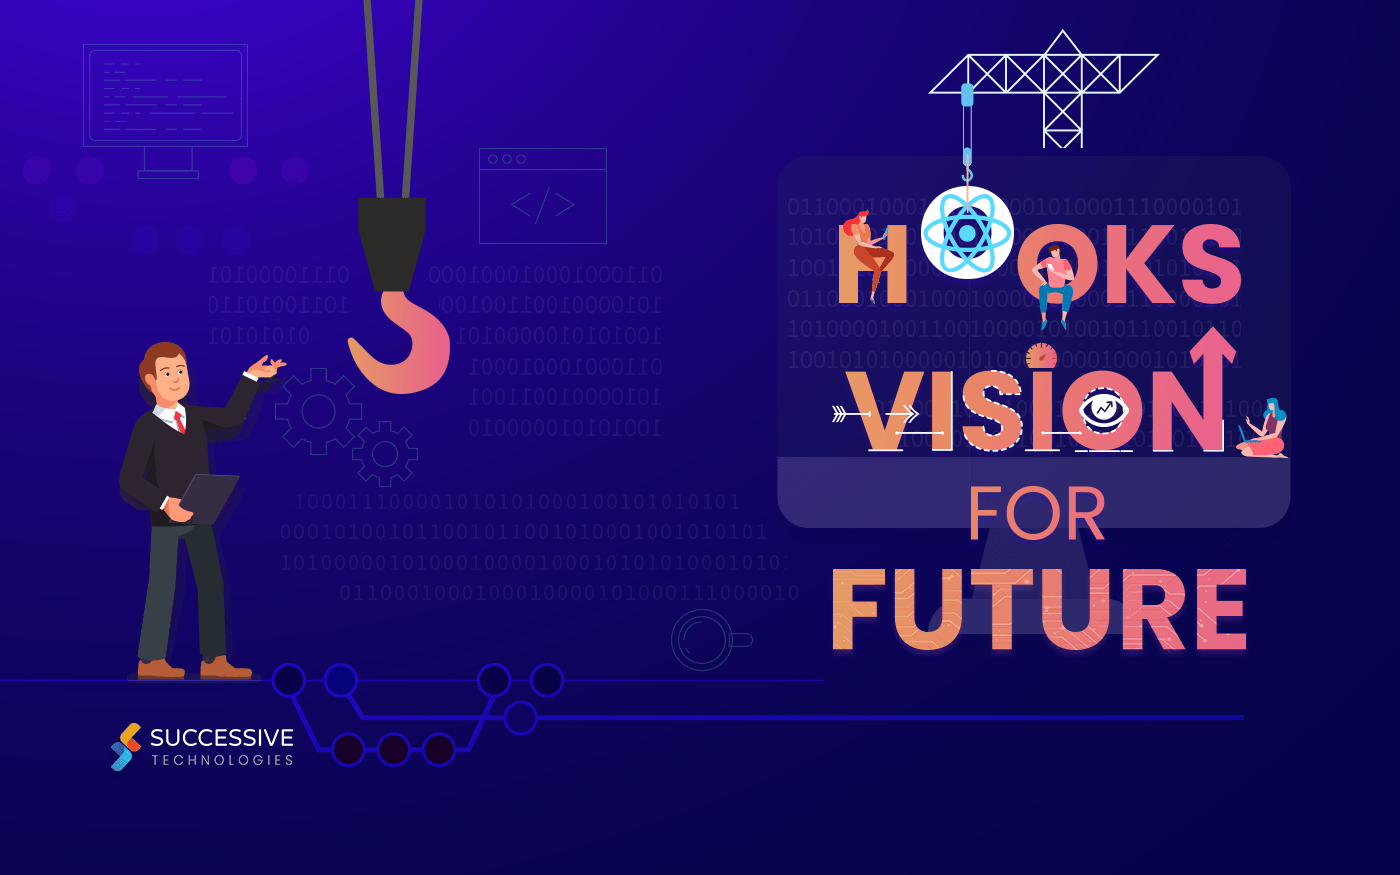 Hooks Vision for Future